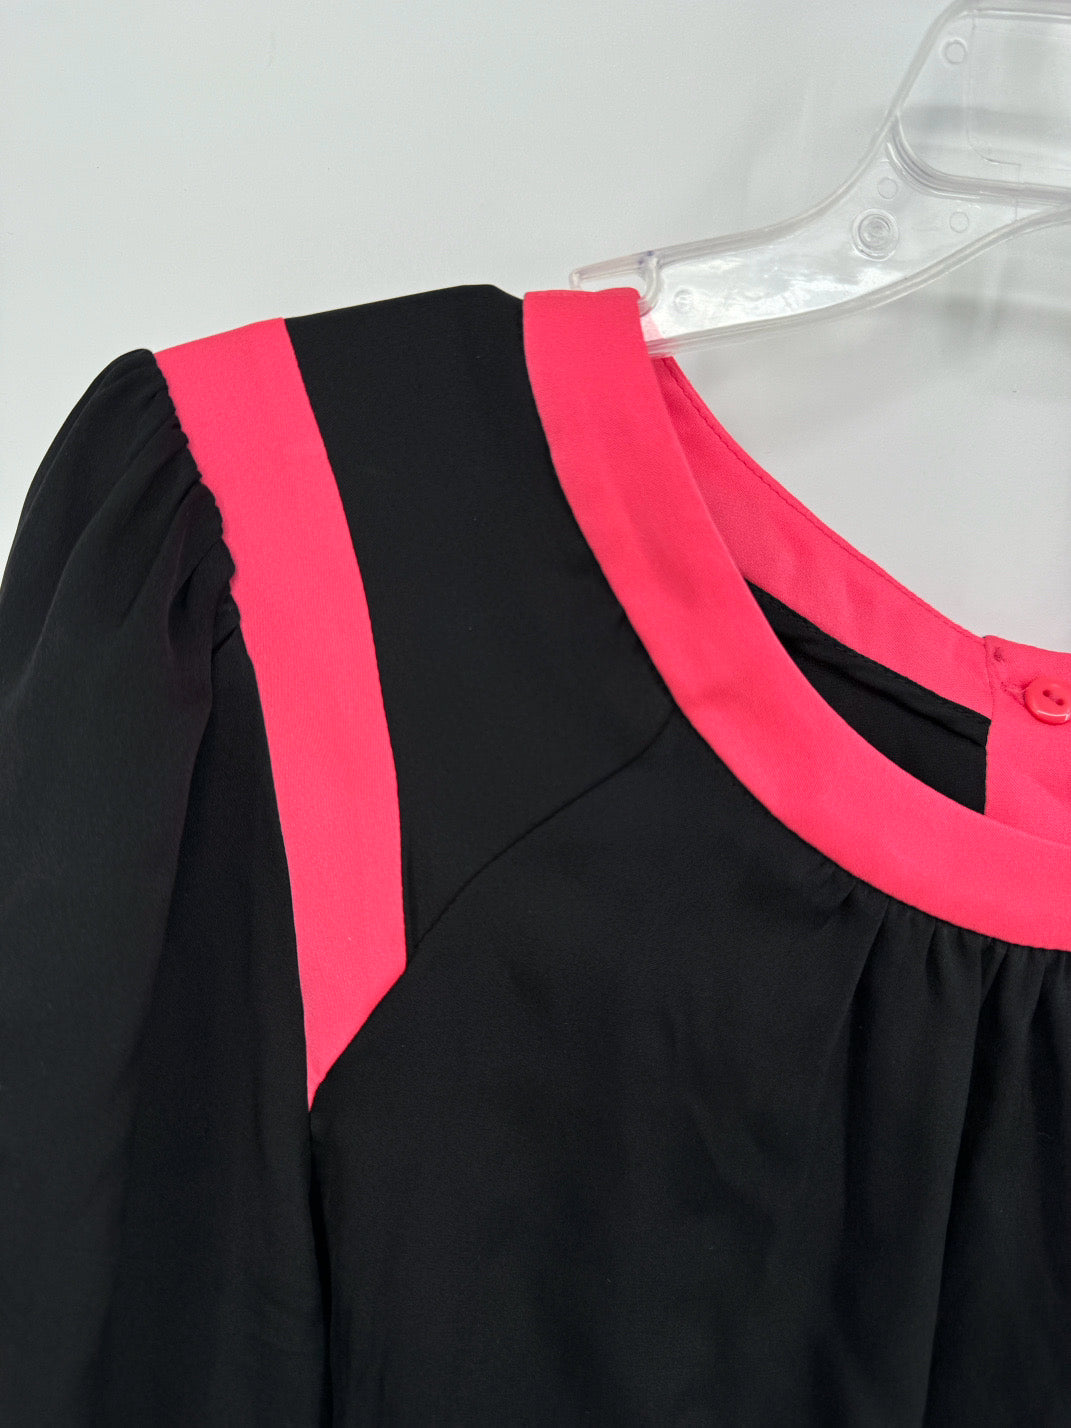 MILLY Size 8 Black & Pink Silk Bow Back Blouse